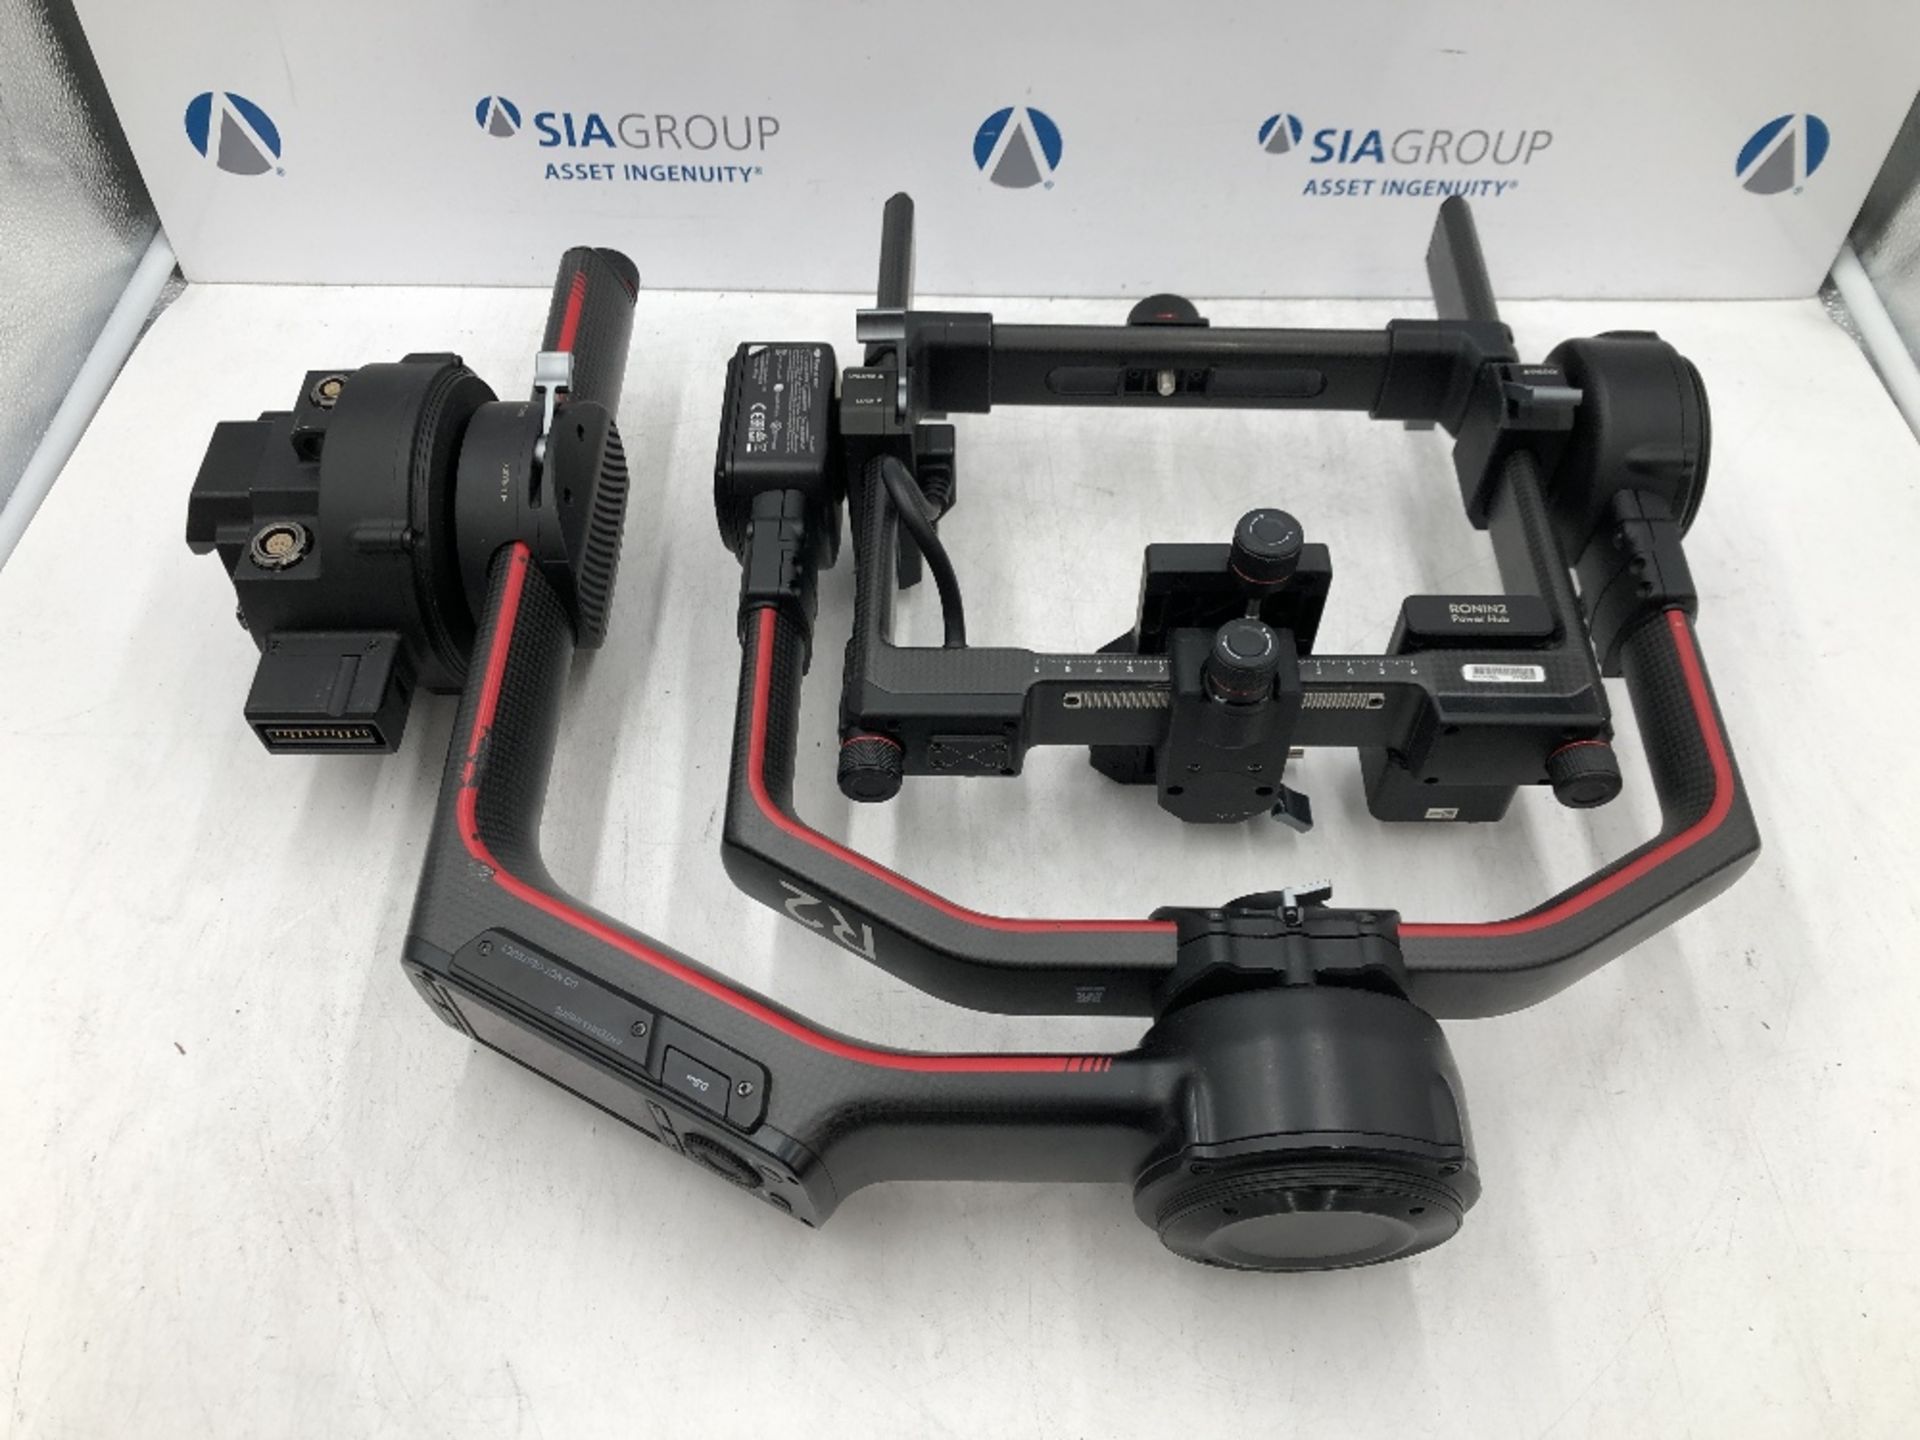 DJI Ronin R2 Professional Combo 3-Axis Compact, Lightweight Stabilized Handheld Gimbal - Image 2 of 12